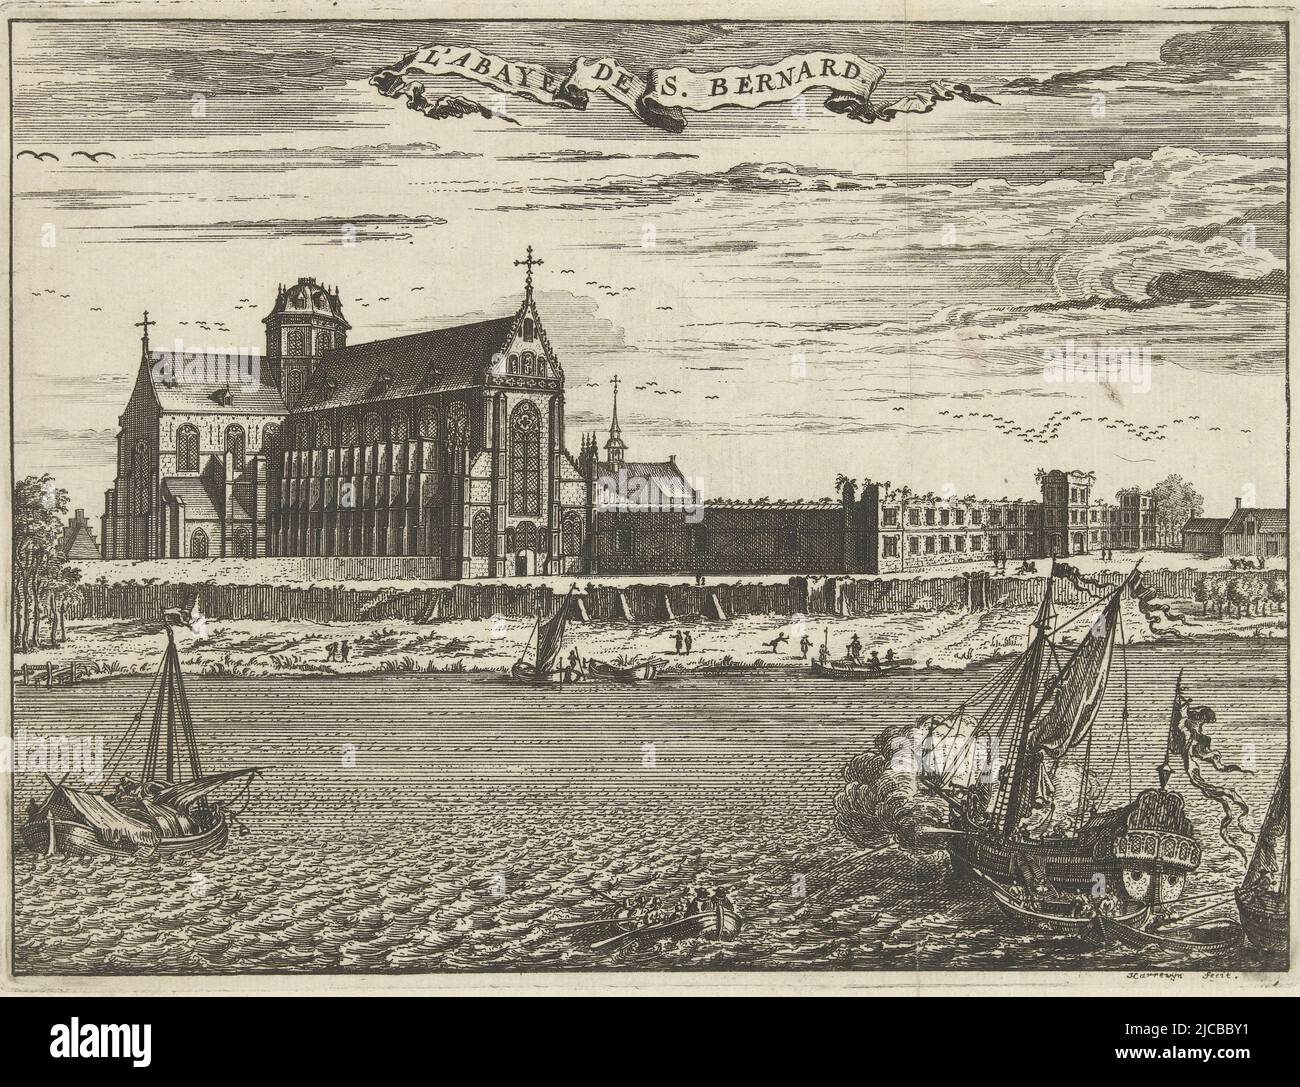 View of a church and the walls of an abbey on a waterfront Top of title on a ribbon, Saint Bernard Abbey L'abaye de S Bernard , print maker: Jacobus Harrewijn, (mentioned on object), Low Countries, 1682 - 1730, paper, etching, h 150 mm × w 199 mm Stock Photo